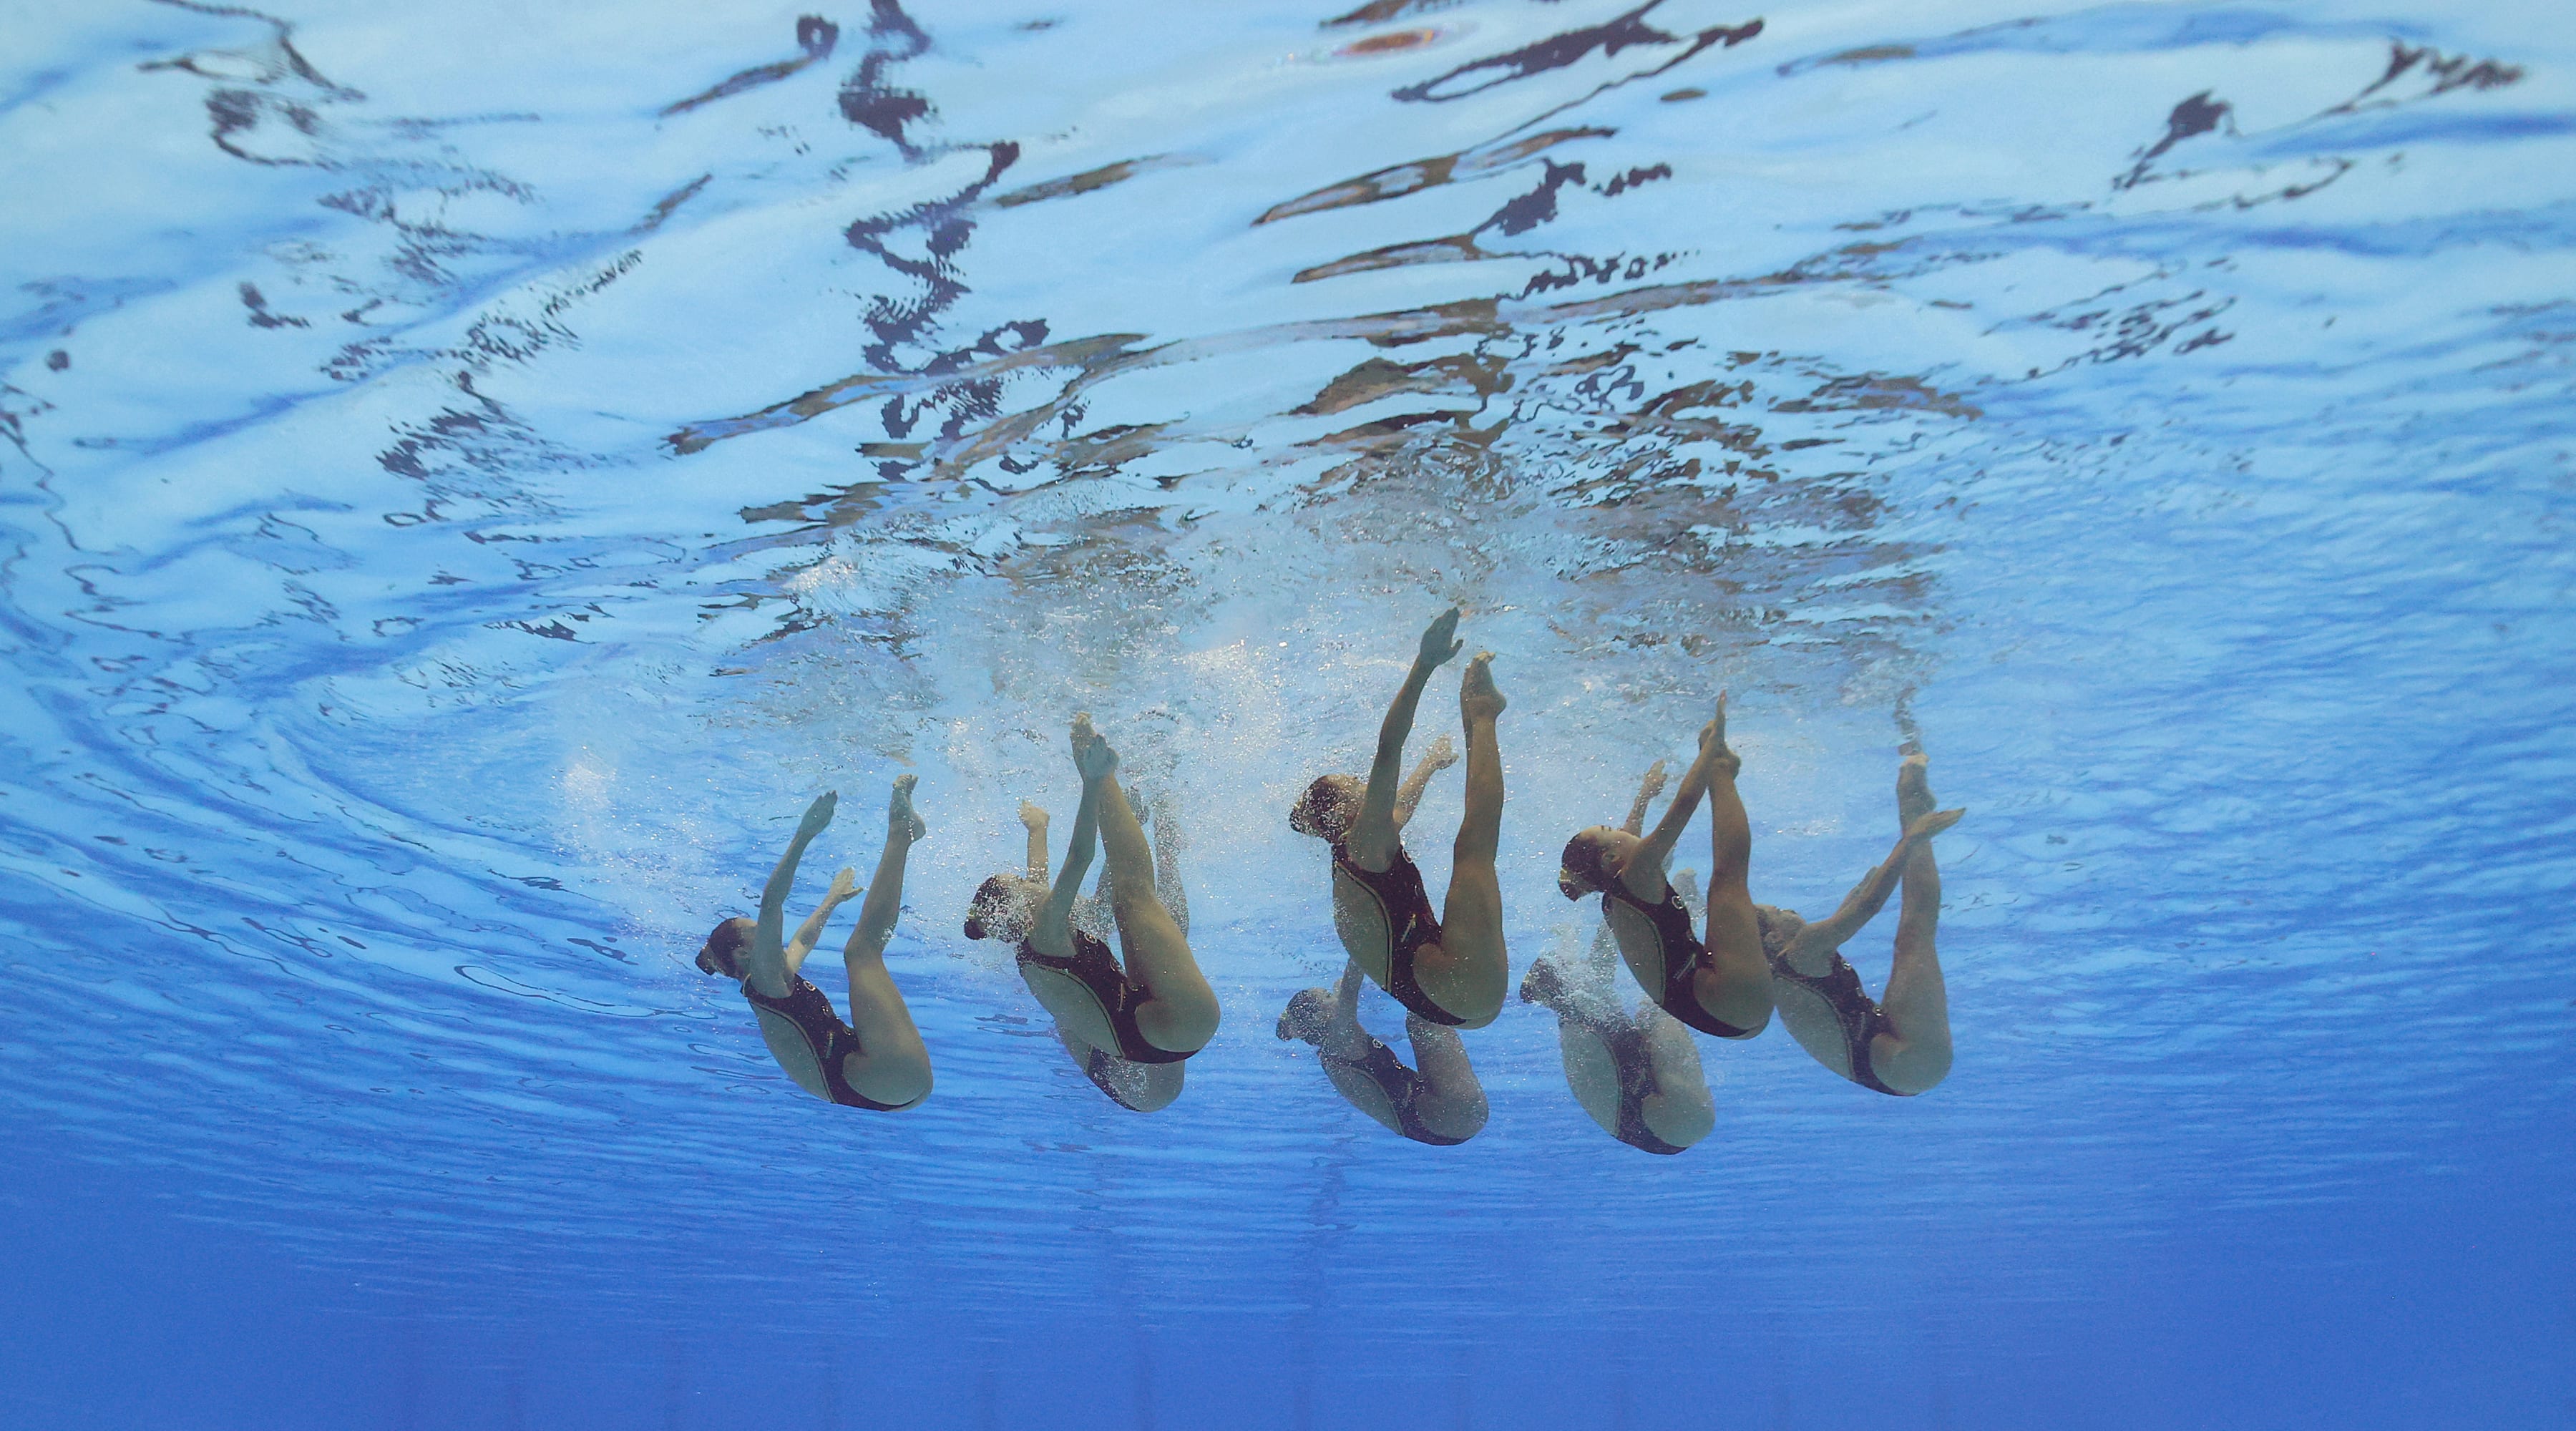 Image taken using an underwater remote camera. Members of Team United States compete in the Artistic Swimming Team Technical Final at the Fukuoka 2023 World Aquatics on July 18, 2023 in Fukuoka, Japan.